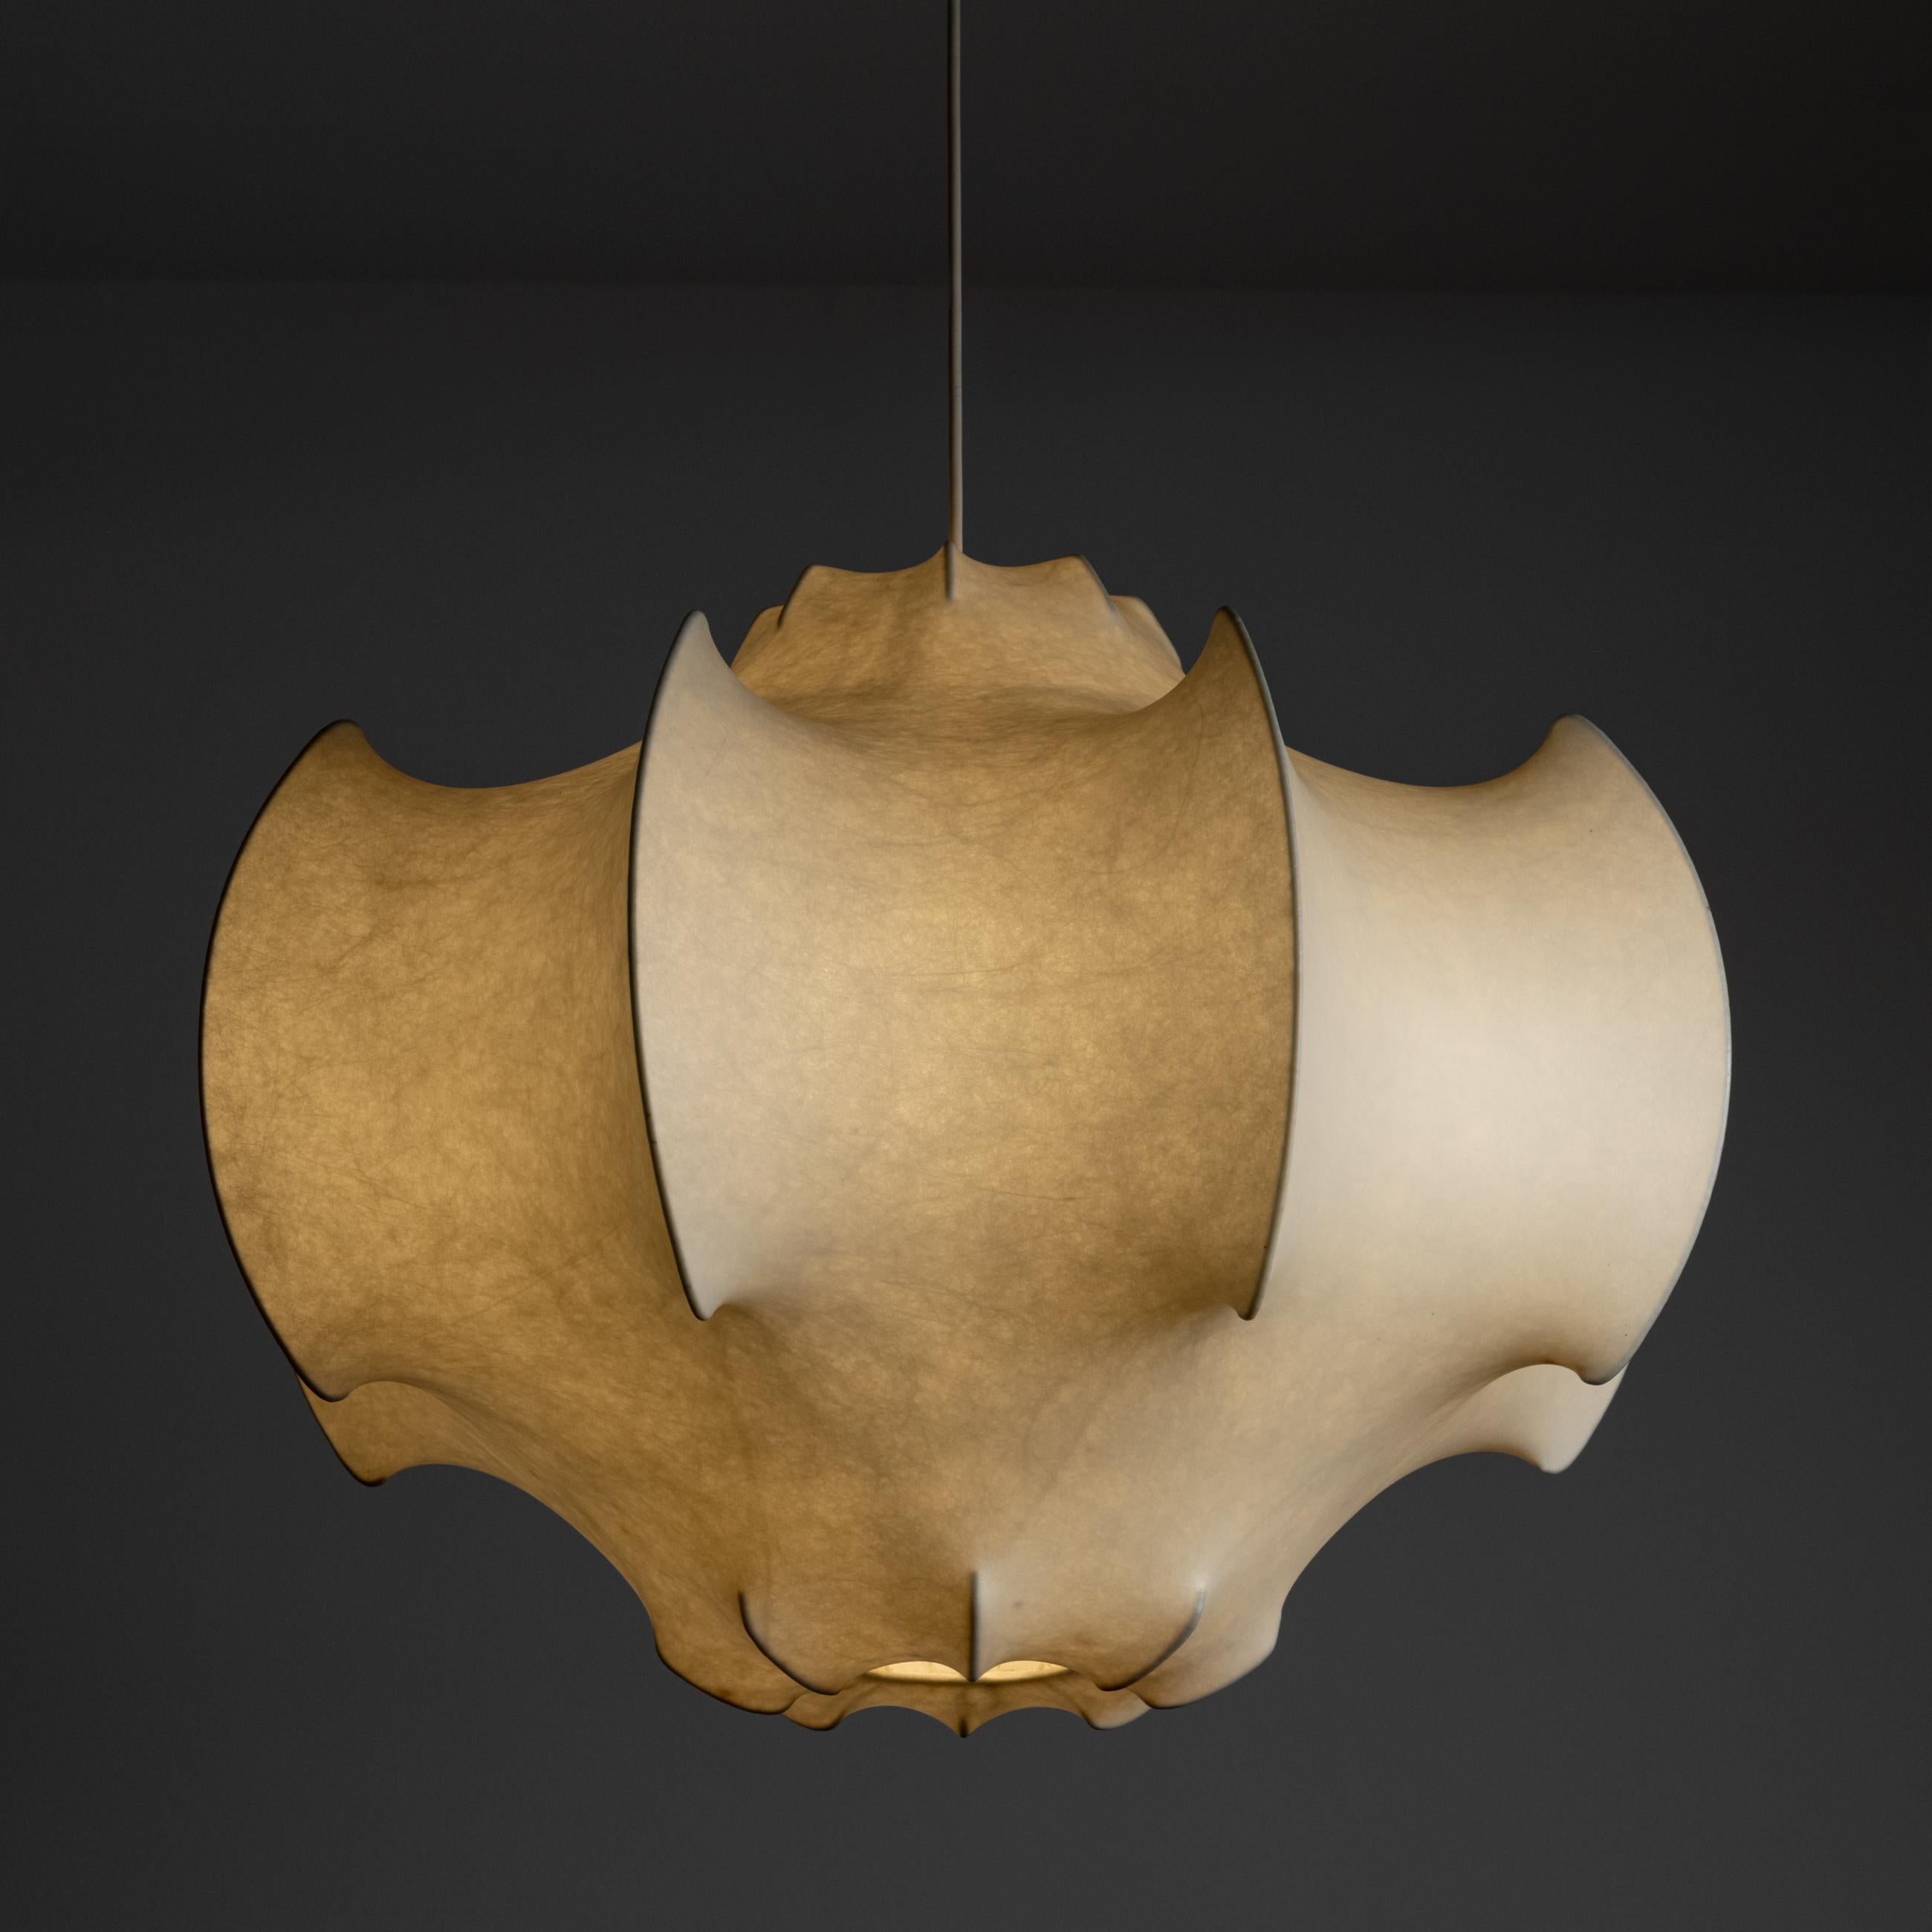 First edition Viscontea suspension light by Achille & Pier Castiglioni for Flos. Designed and manufactured in Italy, circa 1960's. Resin, steel, custom brass backplate. Wired for U.S. standards. We recommend one E27 60w maximum bulb. Bulb not